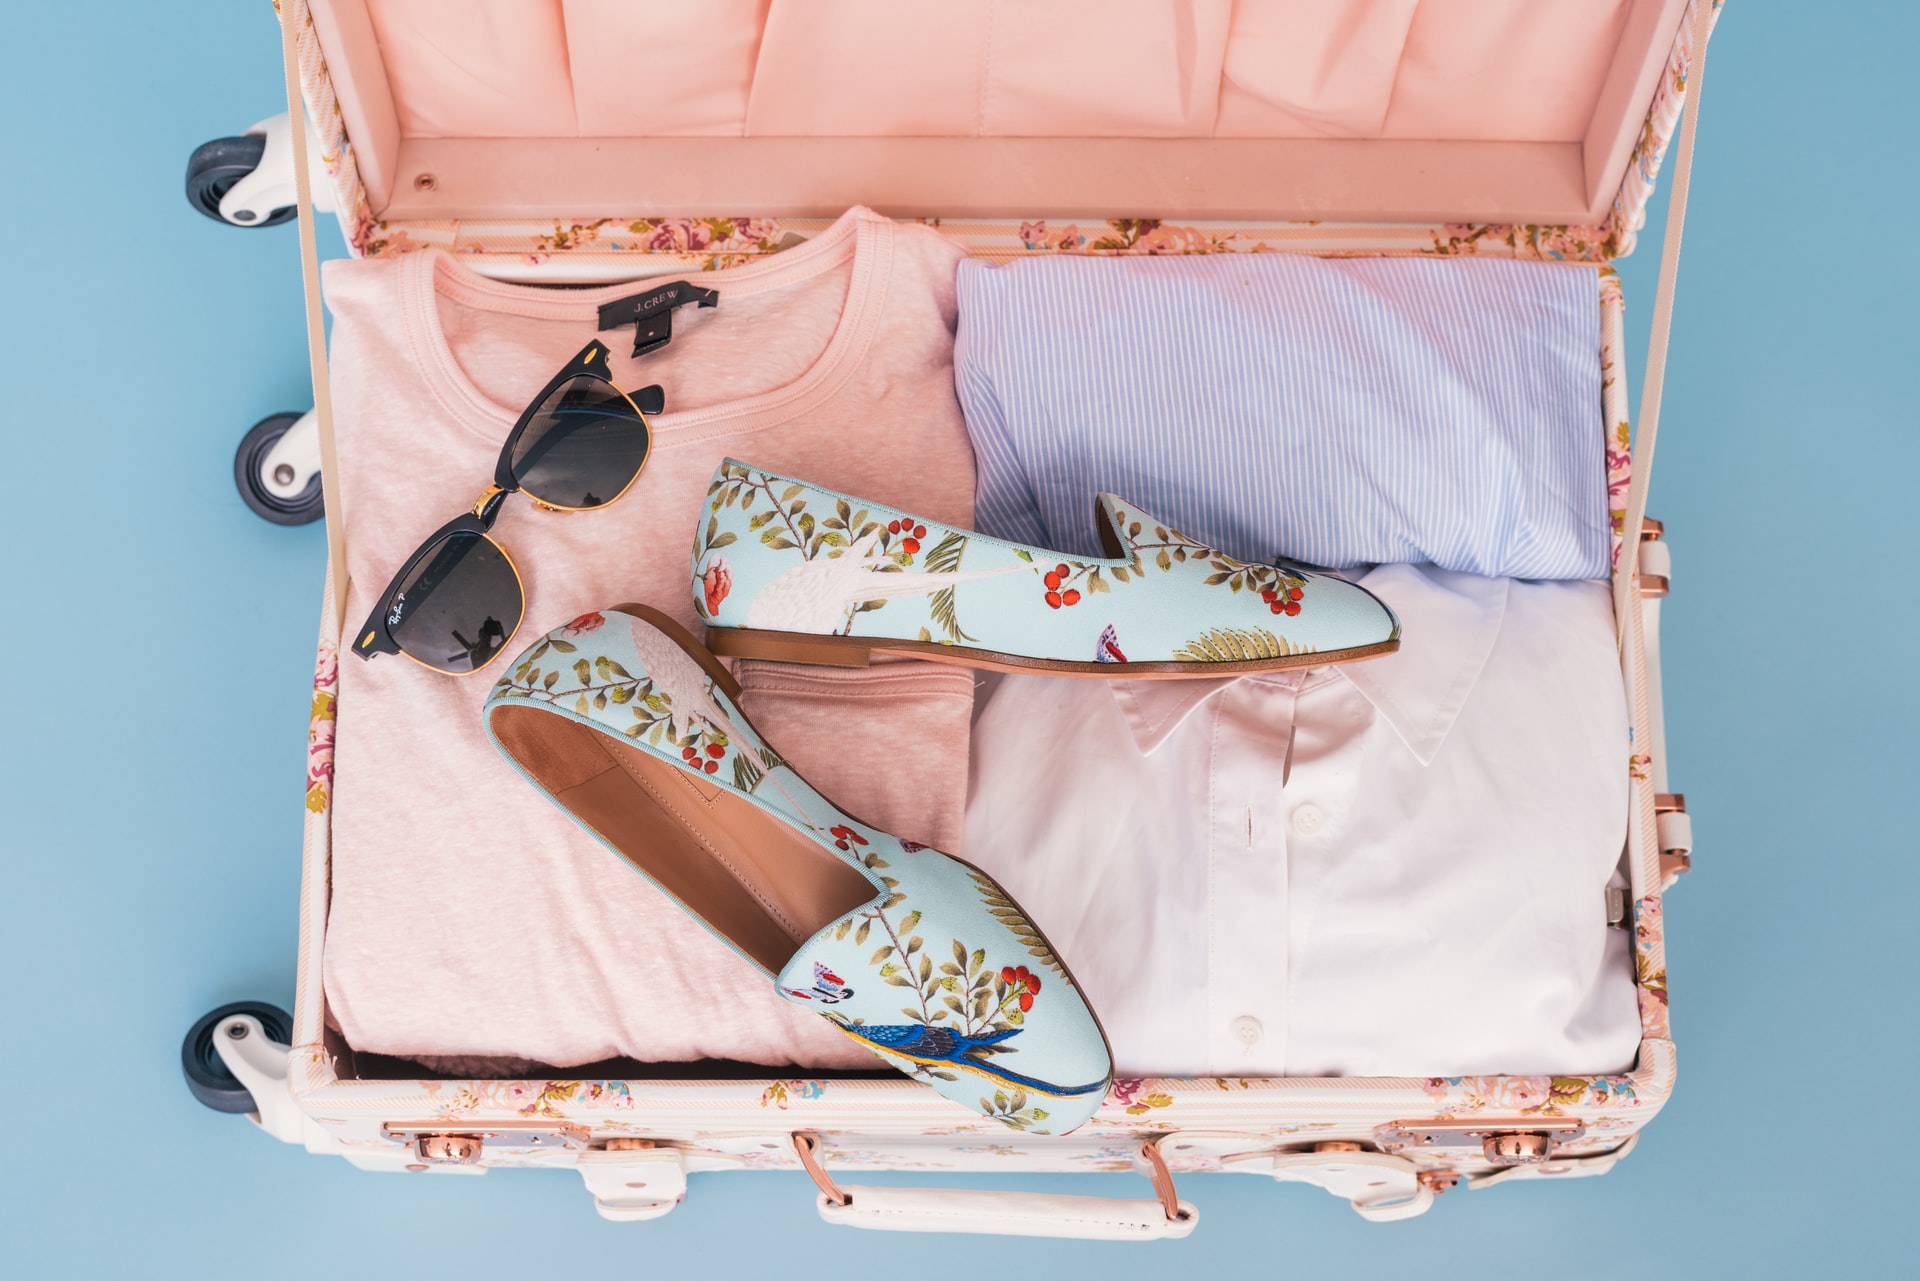 opened pink suitcase with pastel colored shirts, light blue floral slip on shoes, and sunglasses